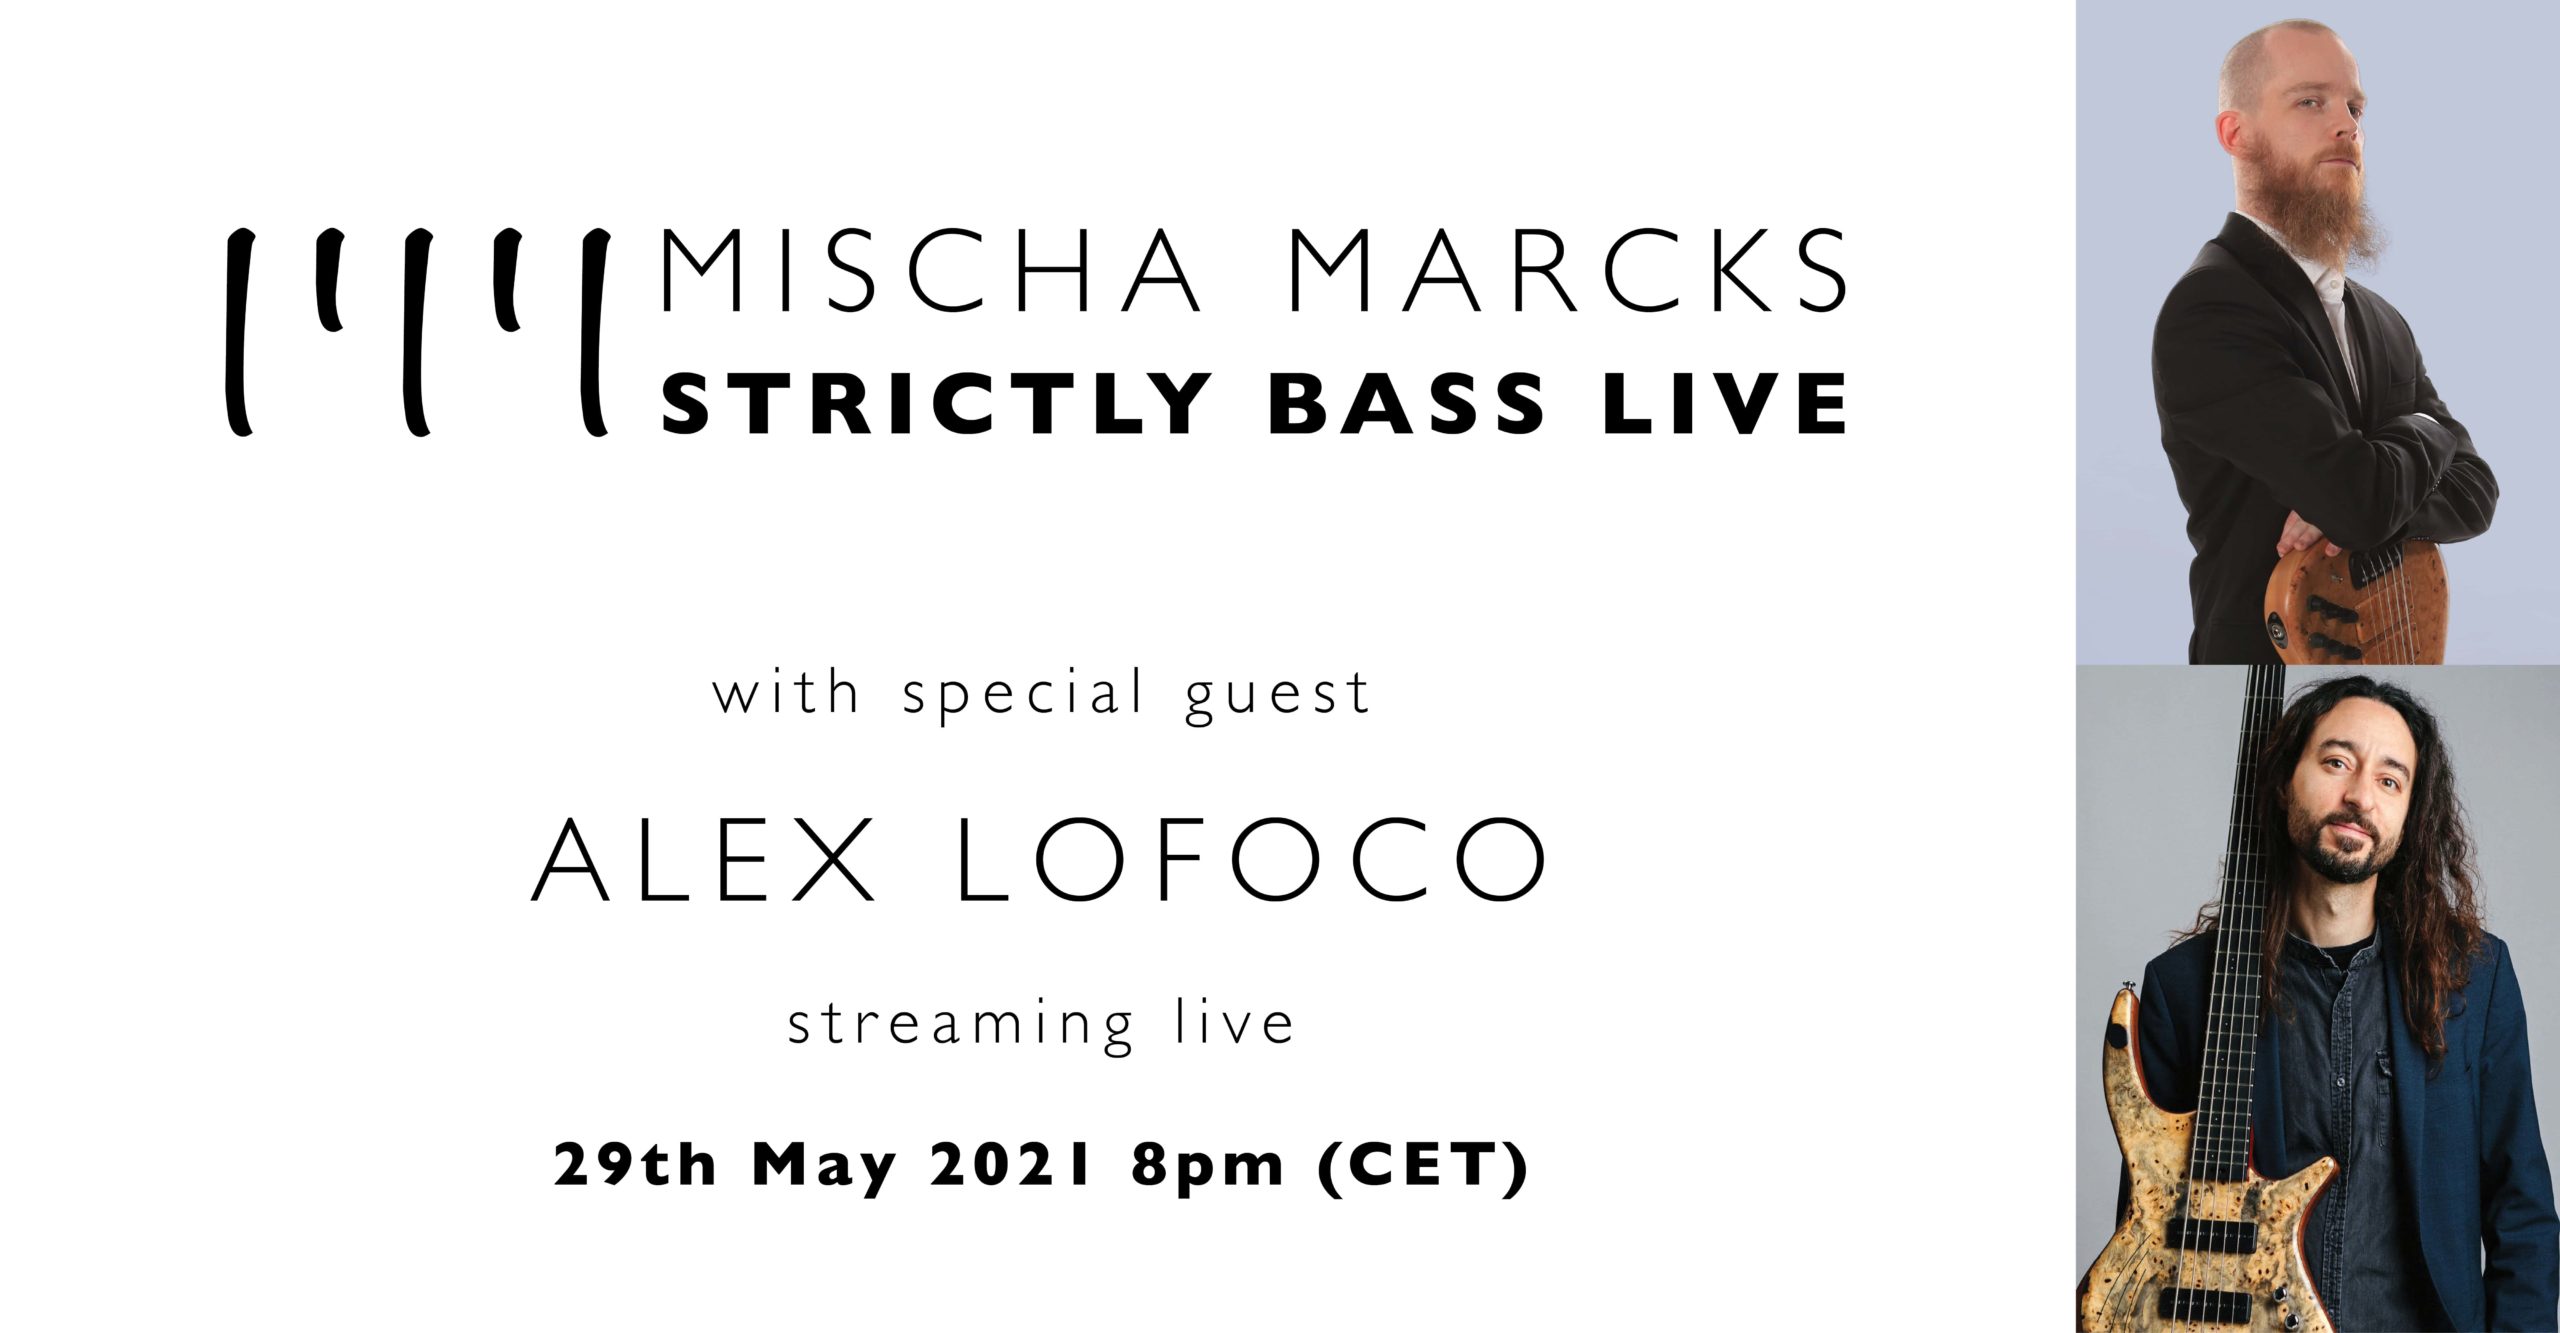 STRICTLY BASS LIVE with special guest Alex Lofoco